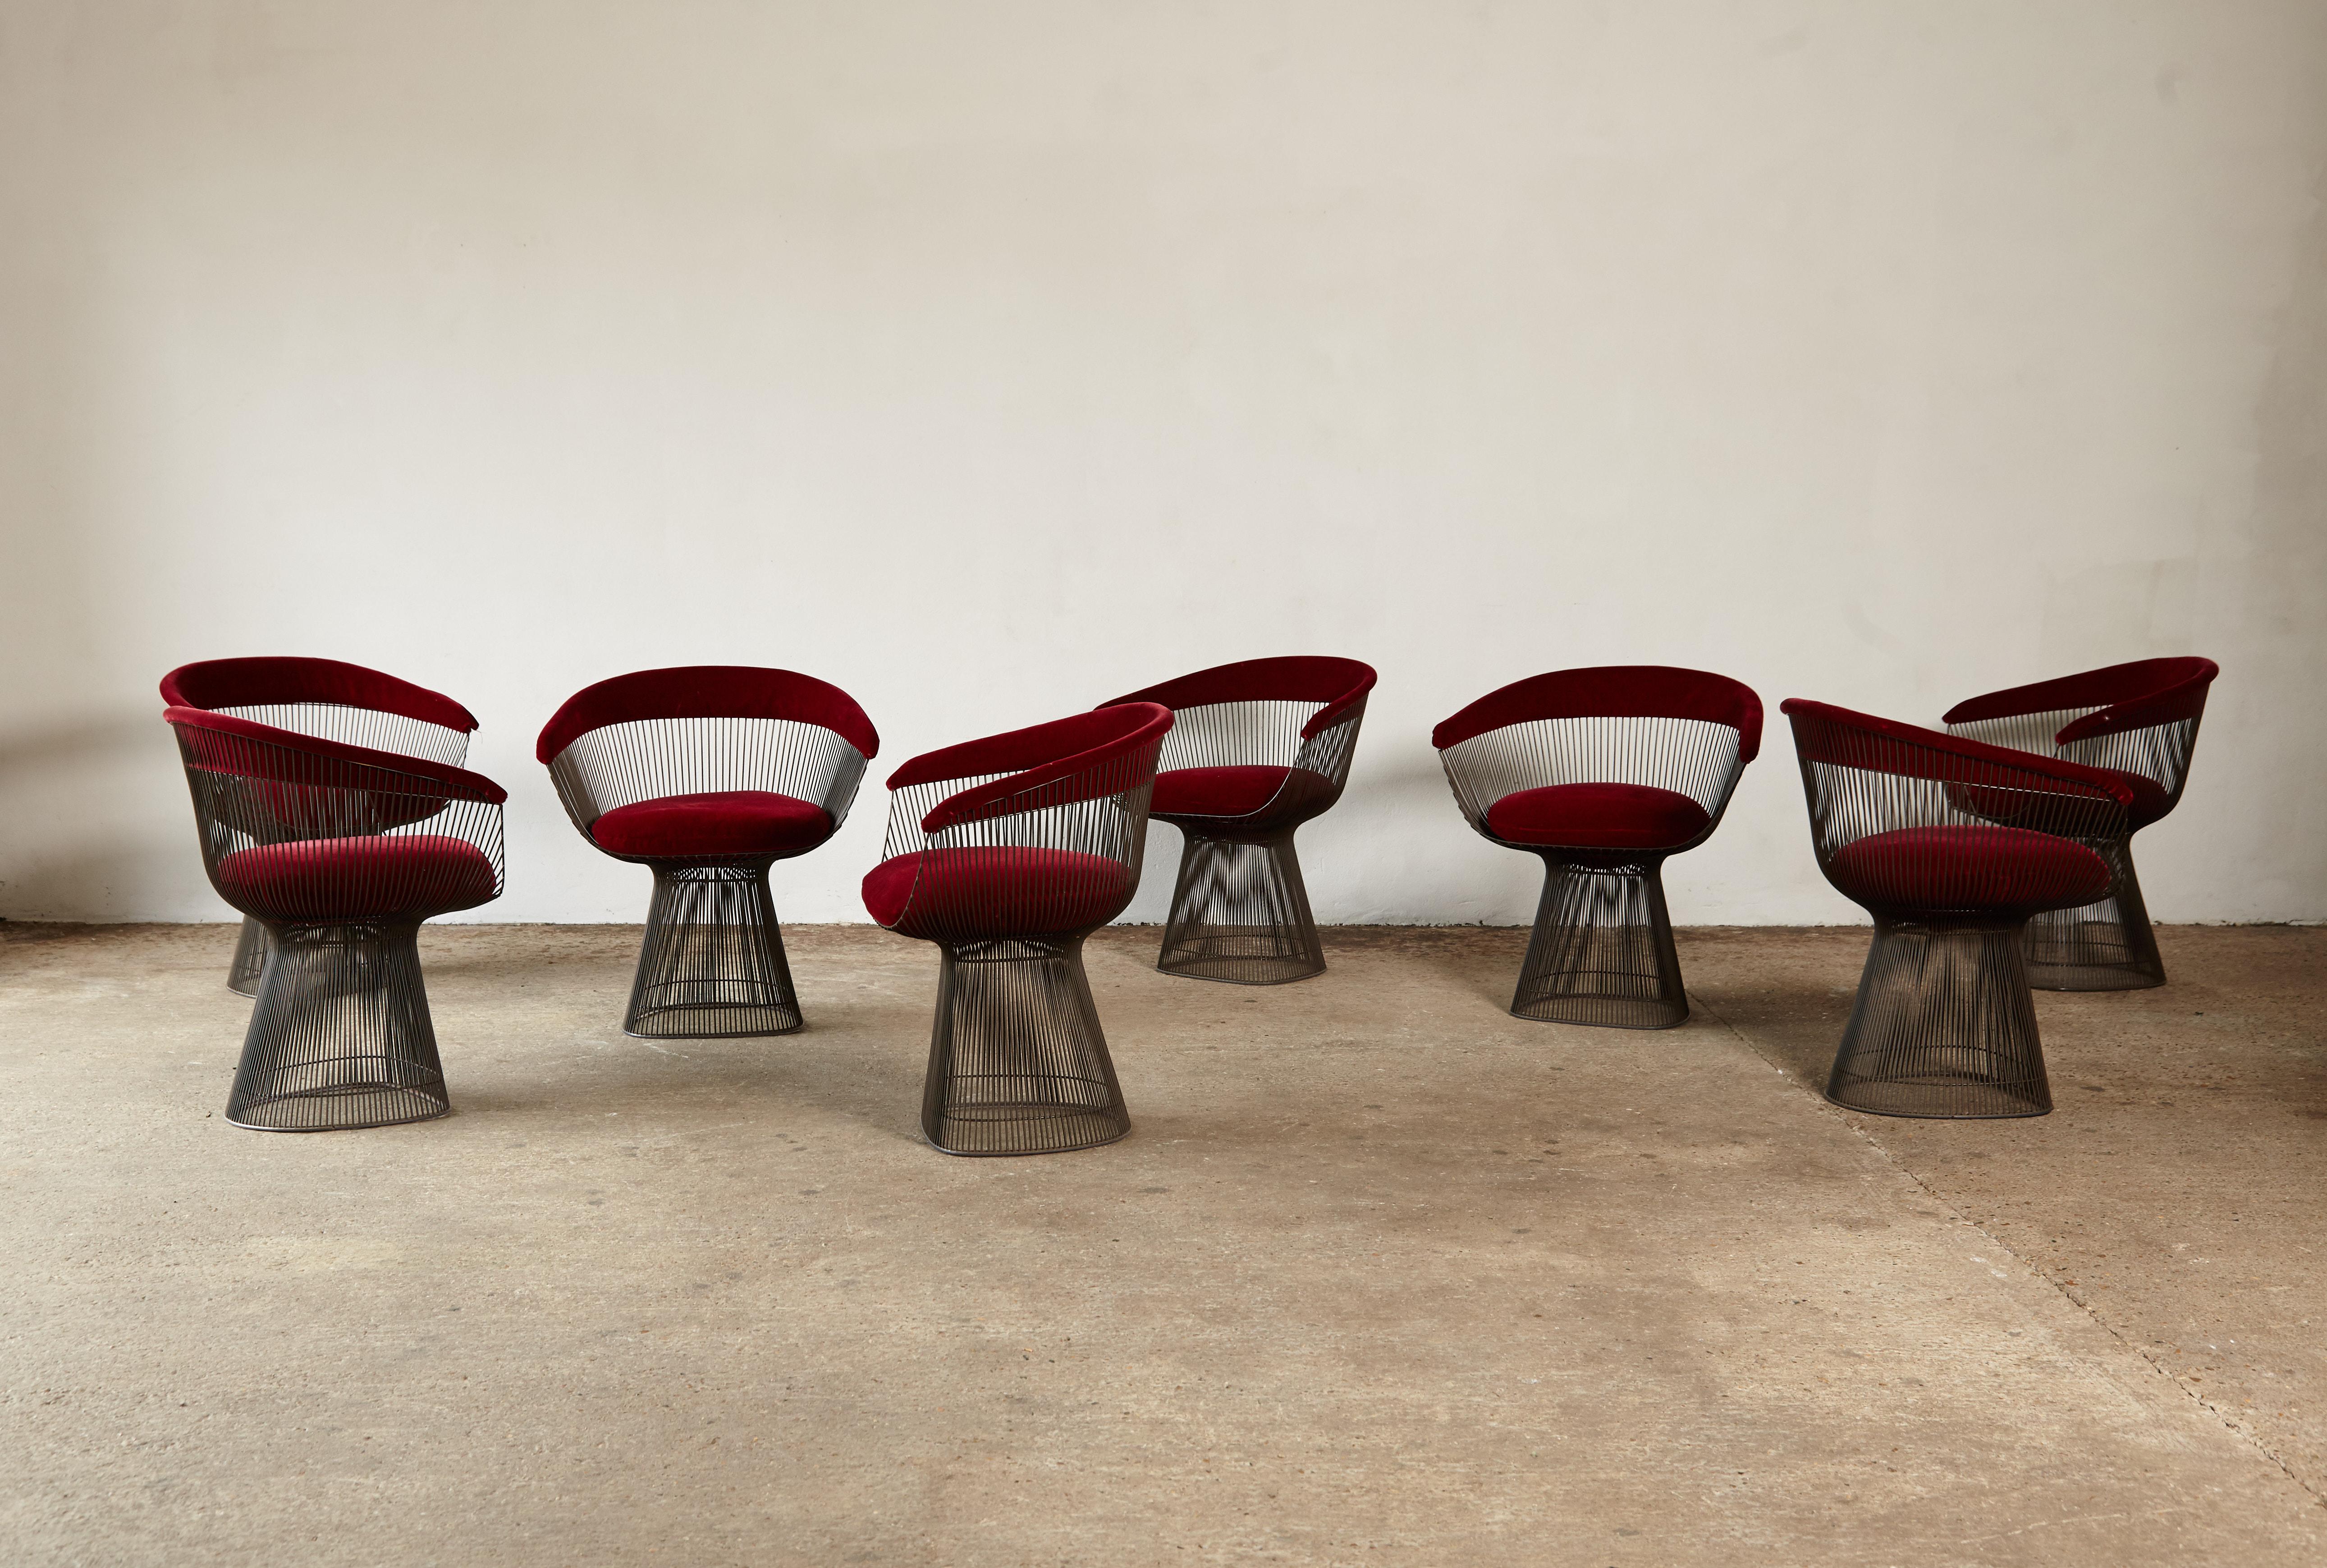 Set of 8 Warren Platner for Knoll wire dining chairs, bronze coated enameled steel with red velvet seats, USA. In good original vintage condition - some minor separations of the upholstery from the chair frames. We can repair these if the chairs